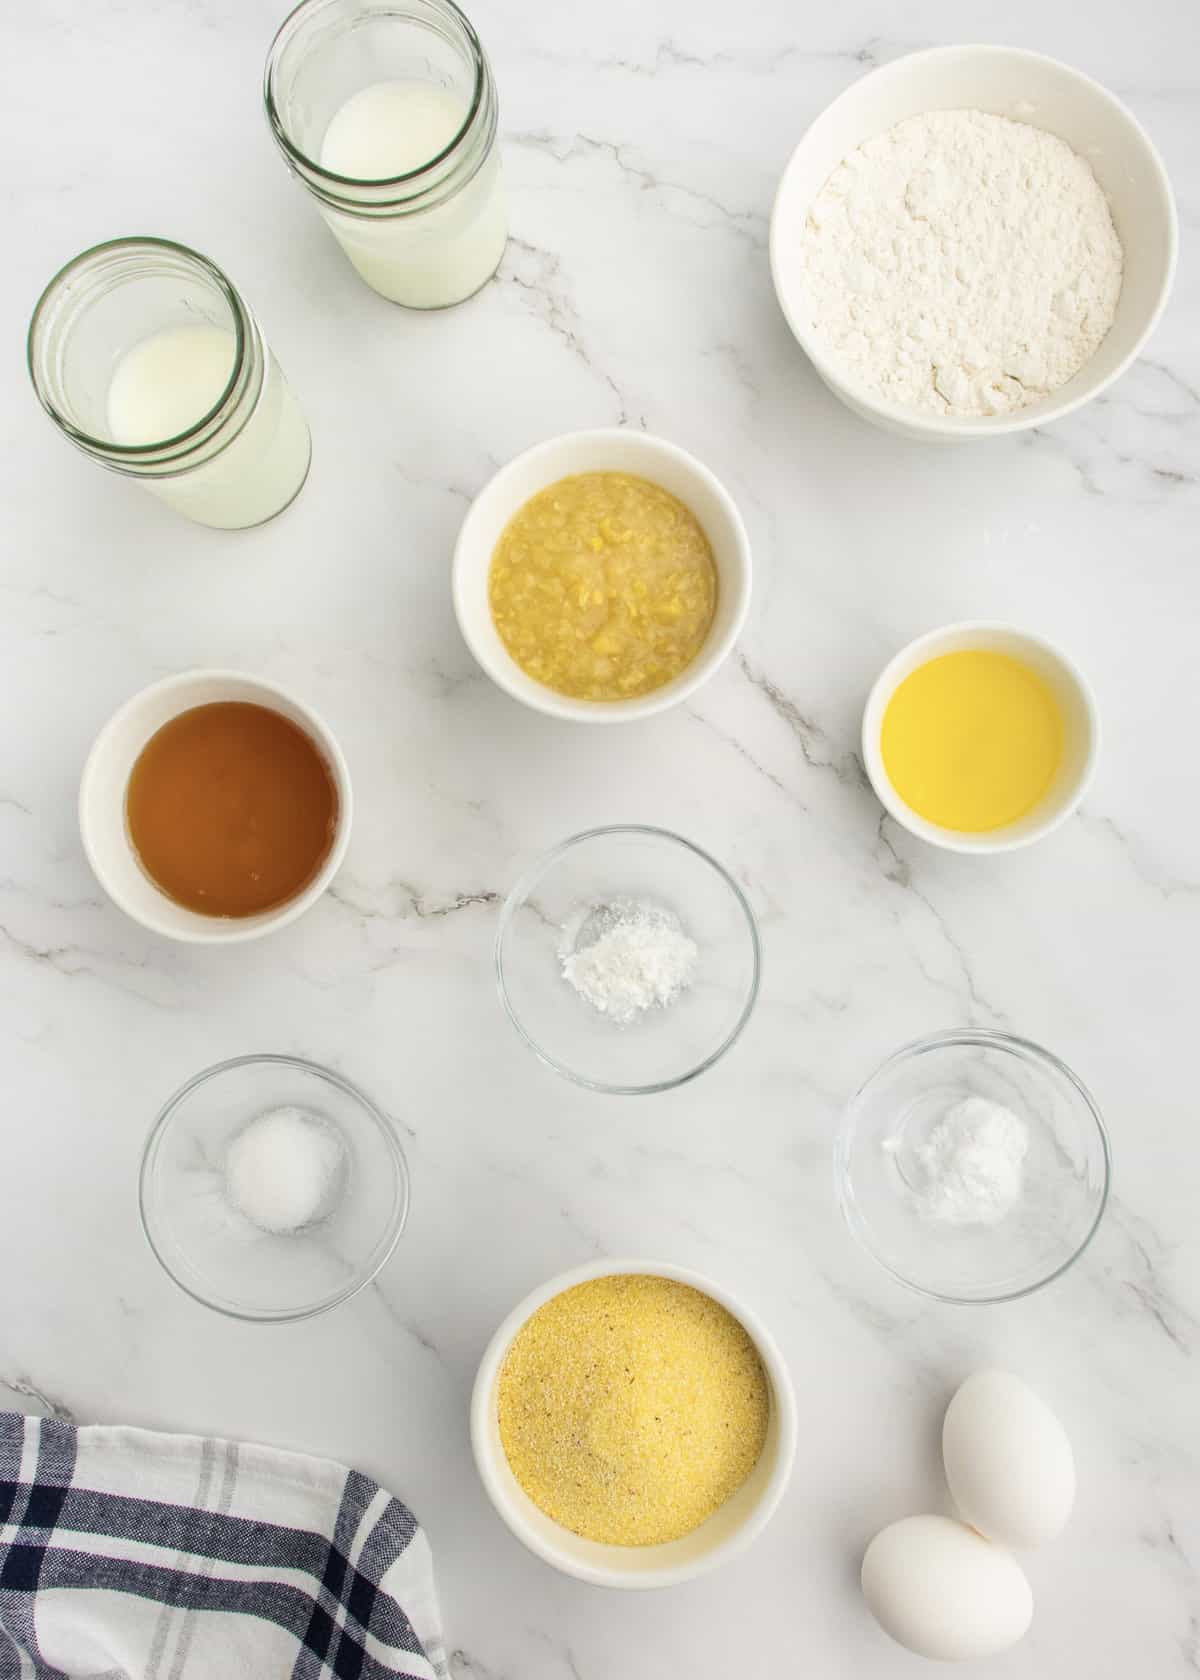 Ingredients for honey corn muffins in small glass dishes on a white marble counter.